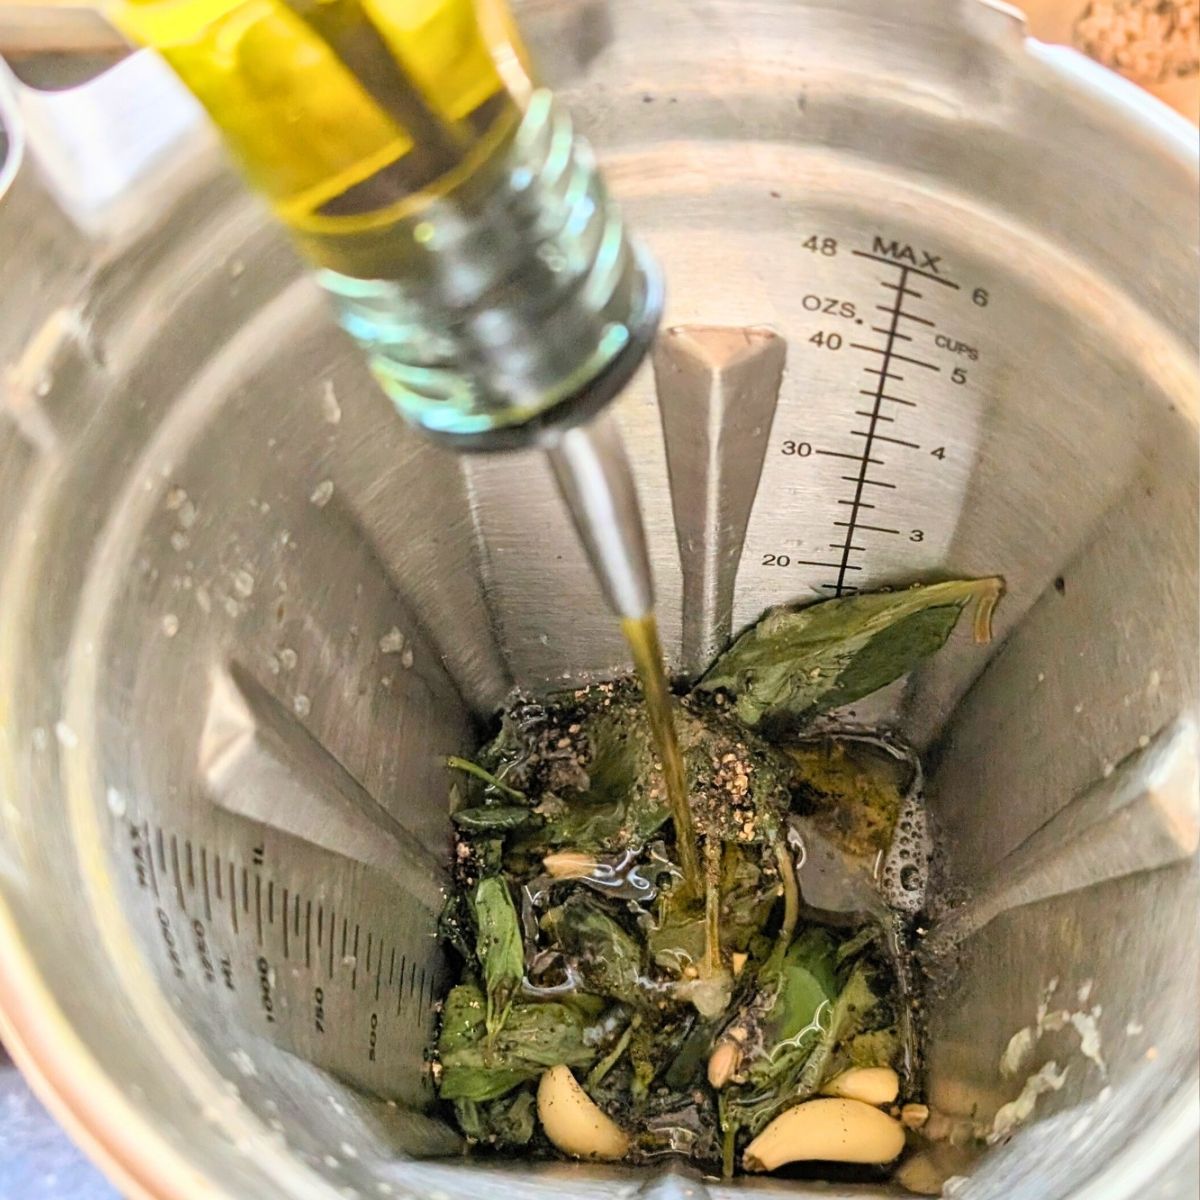 a blender full of basil garlic vinegar and herbs, with olive oil being streamed in.